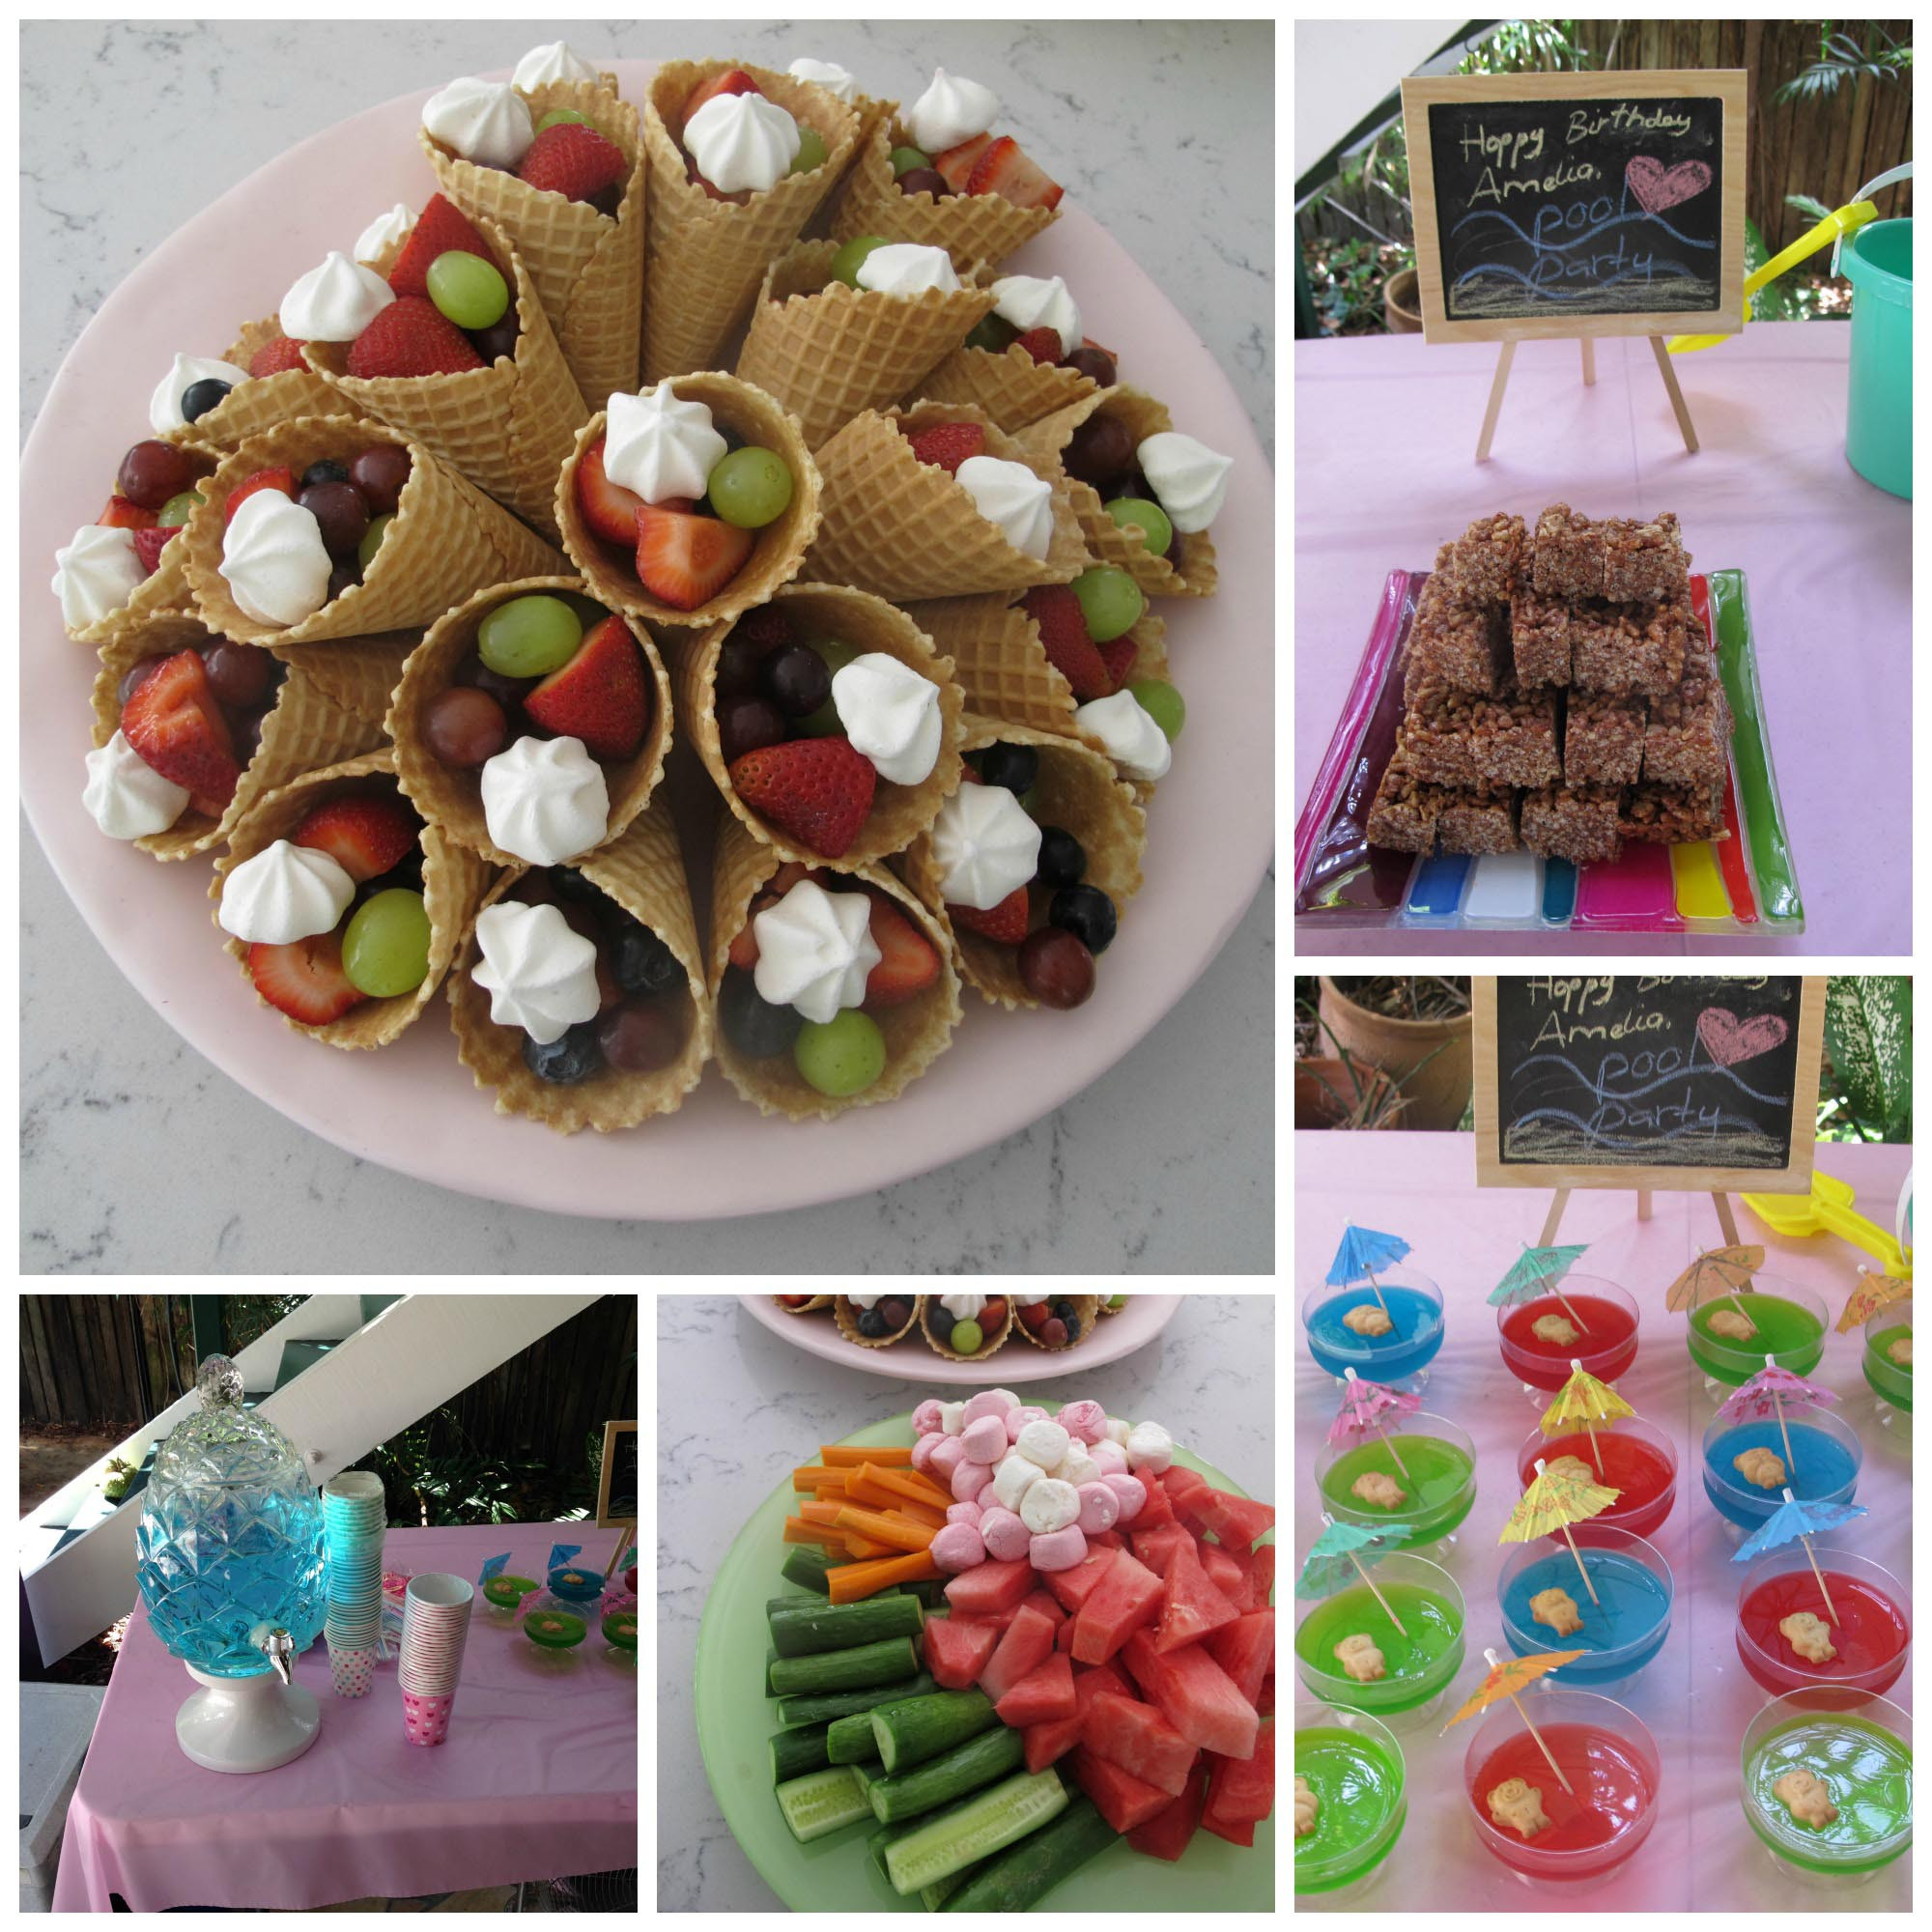 Pool Party Food Menu Ideas
 The Perfect Kids Pool Party